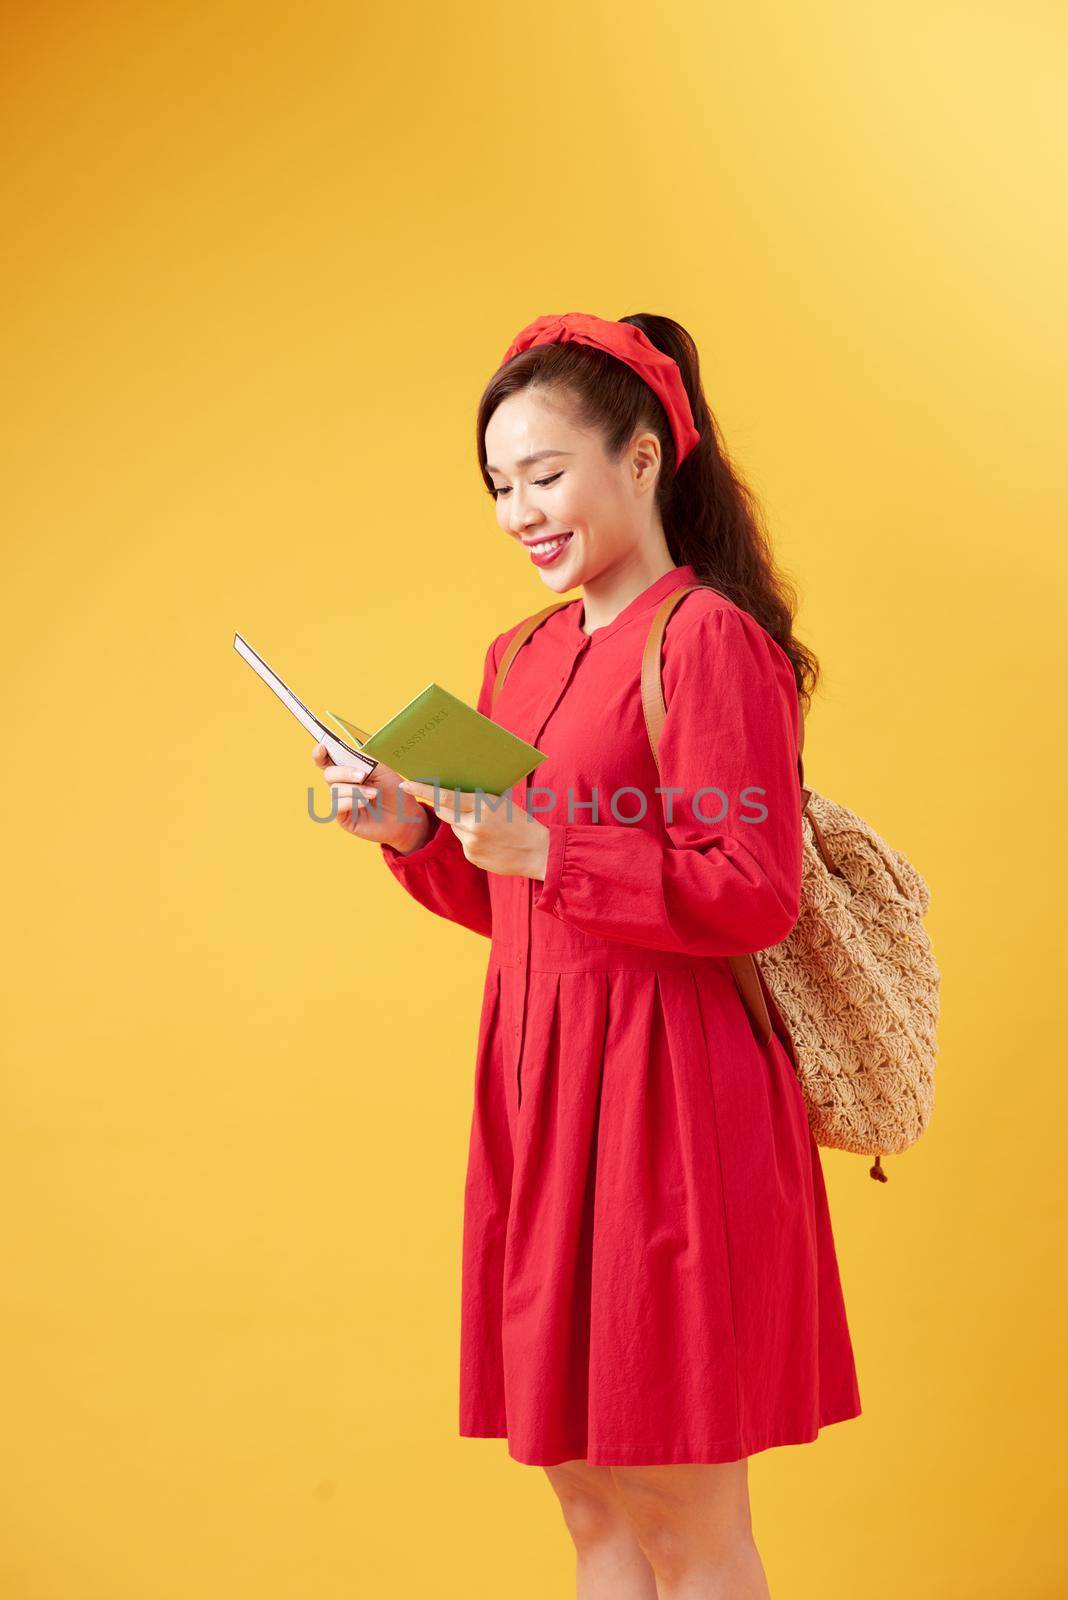 Traveler tourist young beautiful asian woman with backpack, smiling and standing on yellow background. Summer holidays, vacation and travel concept